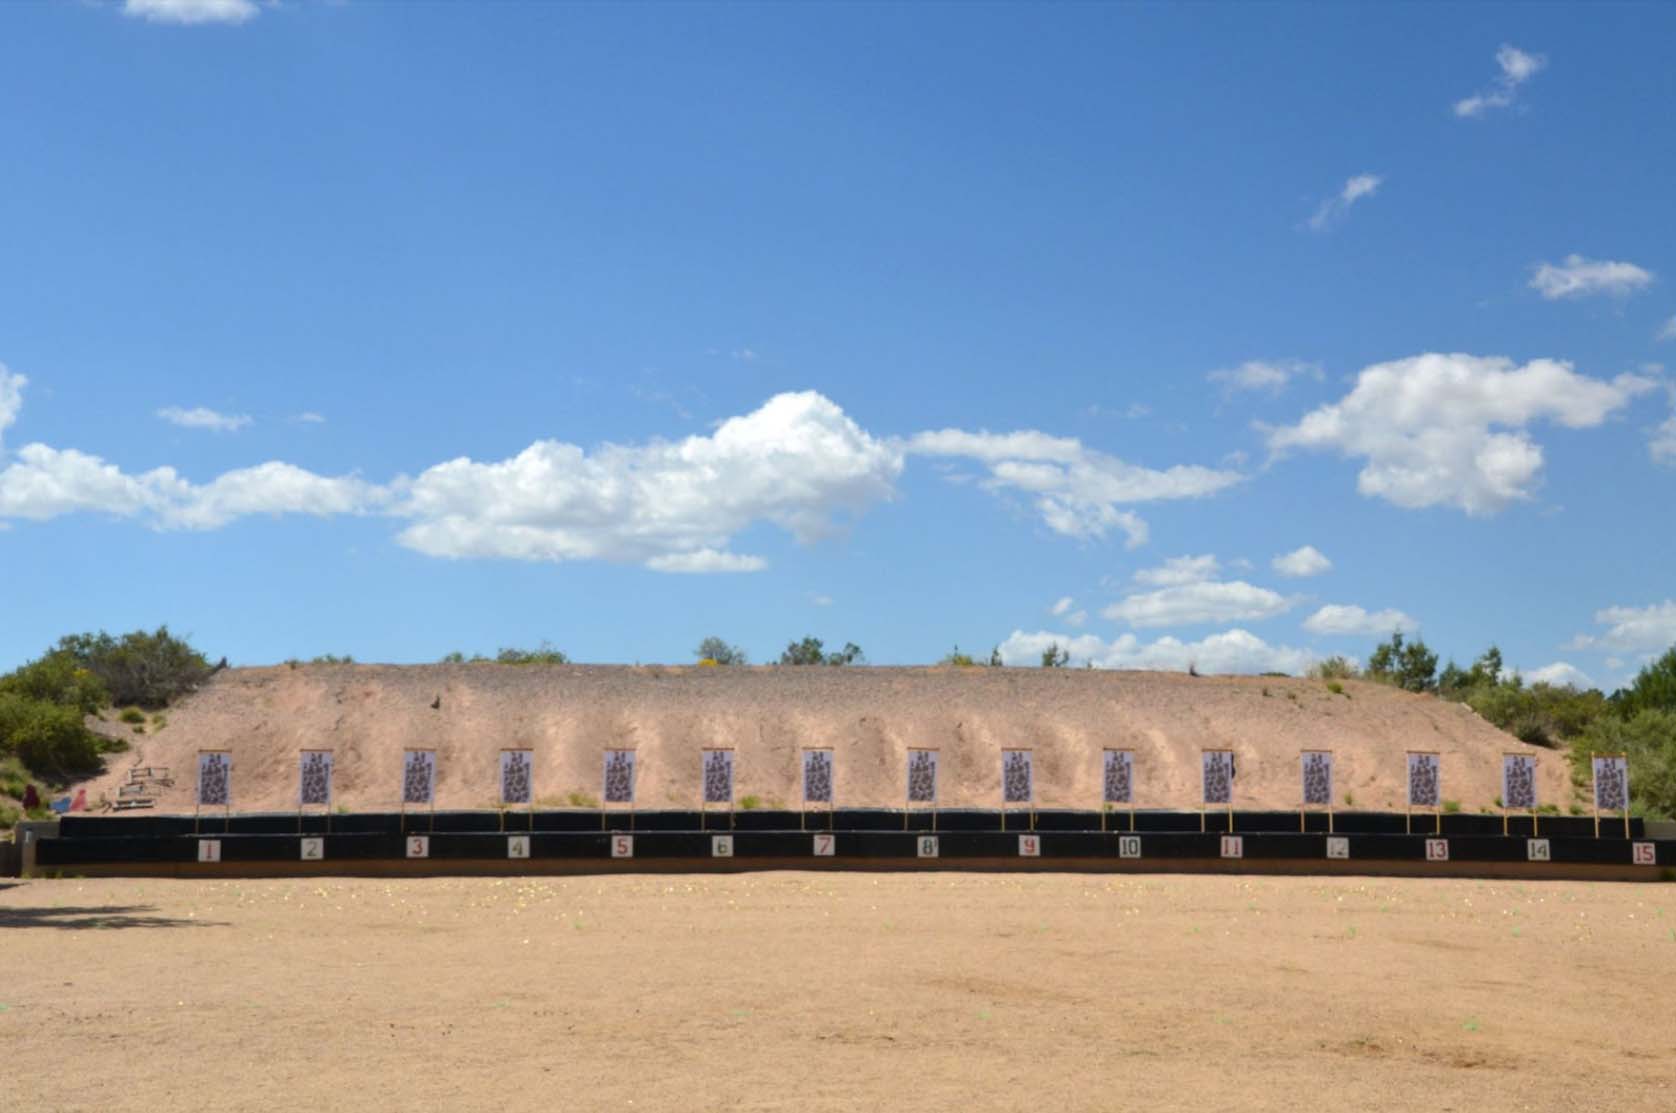 Paper targets set up for firearms training at an outdoor gun range, with a gravel berm as a backdrop.